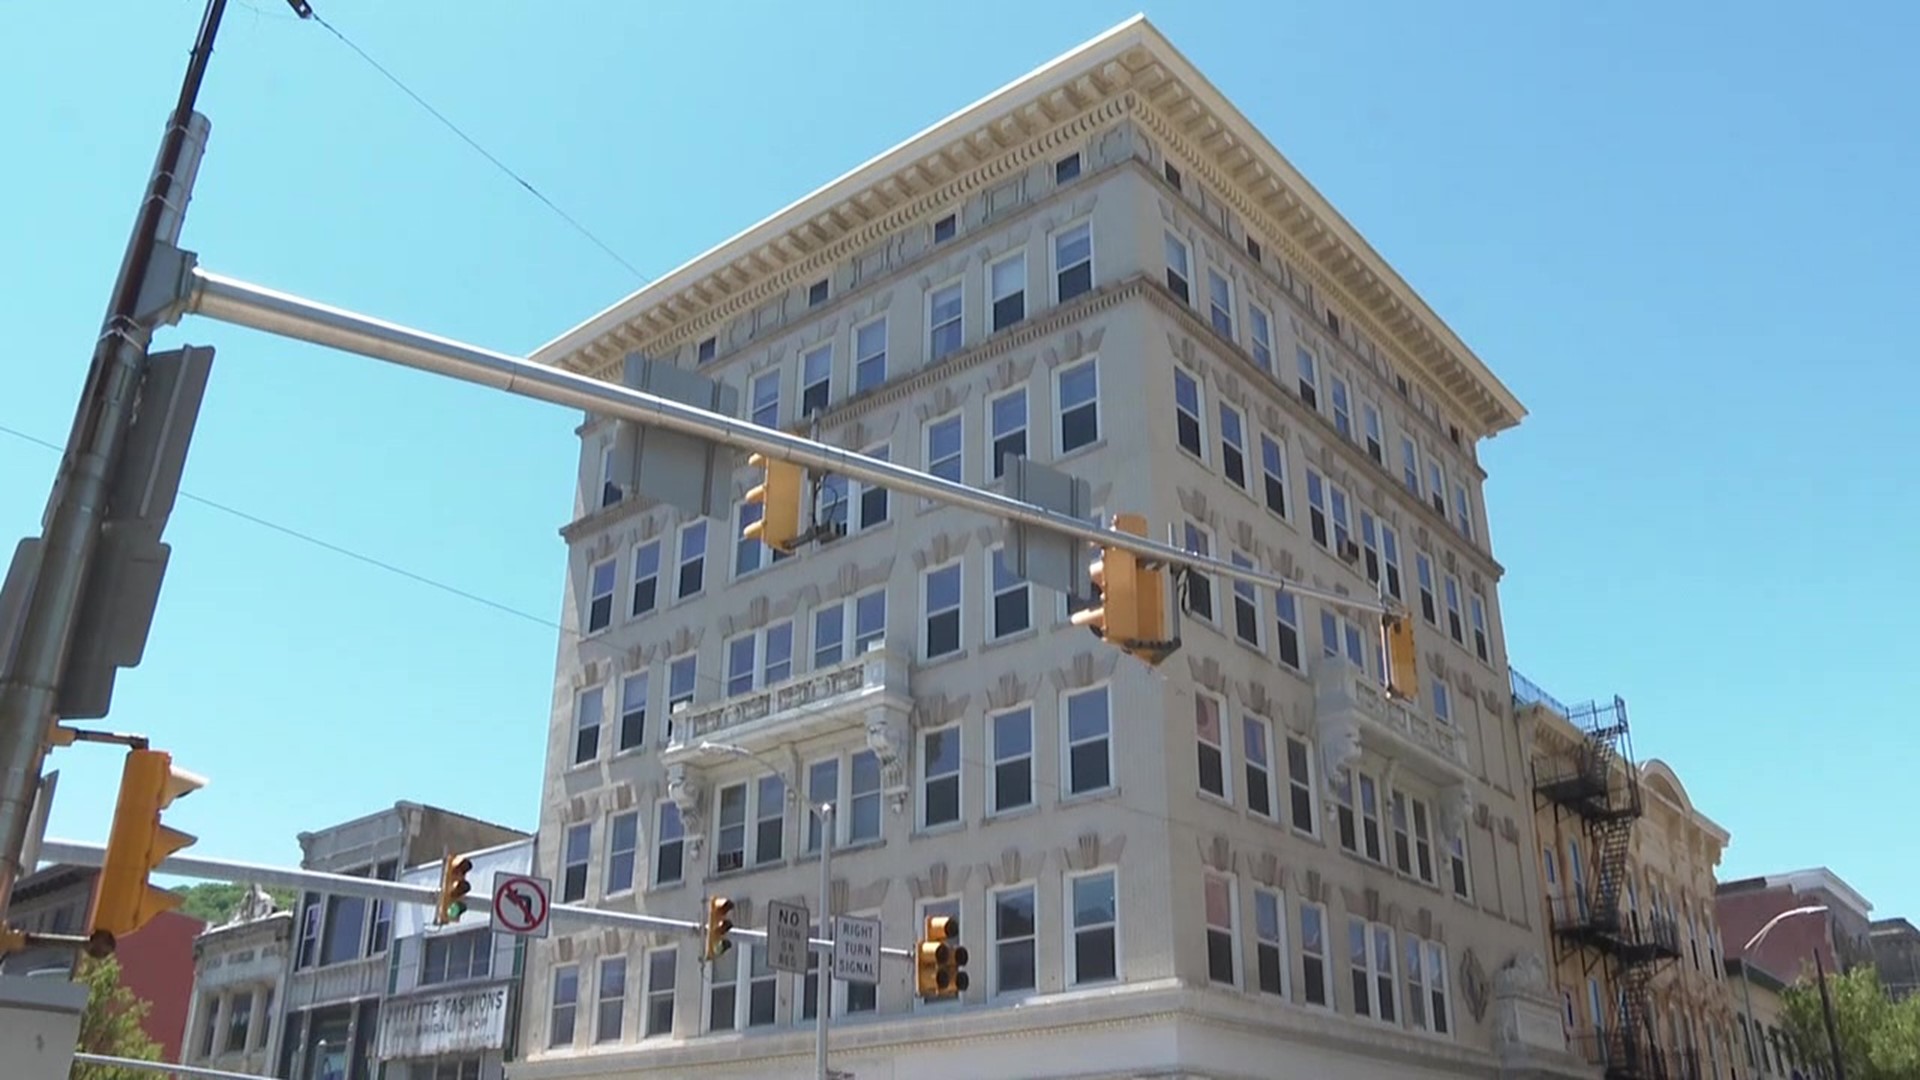 What's called Pottsville's oldest "skyscraper" has a new owner and a chance at rebirth. It couldn't come soon enough for one business owner.